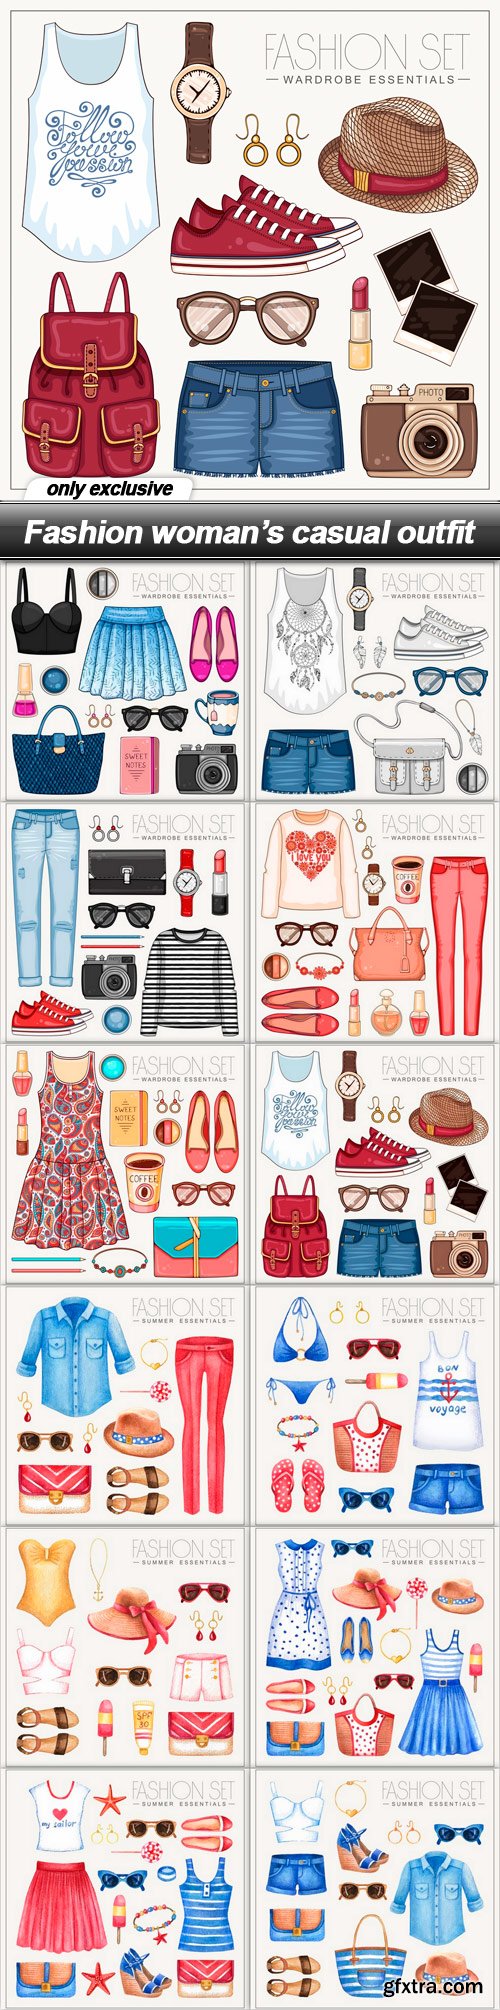 Fashion woman’s casual outfit - 12 EPS